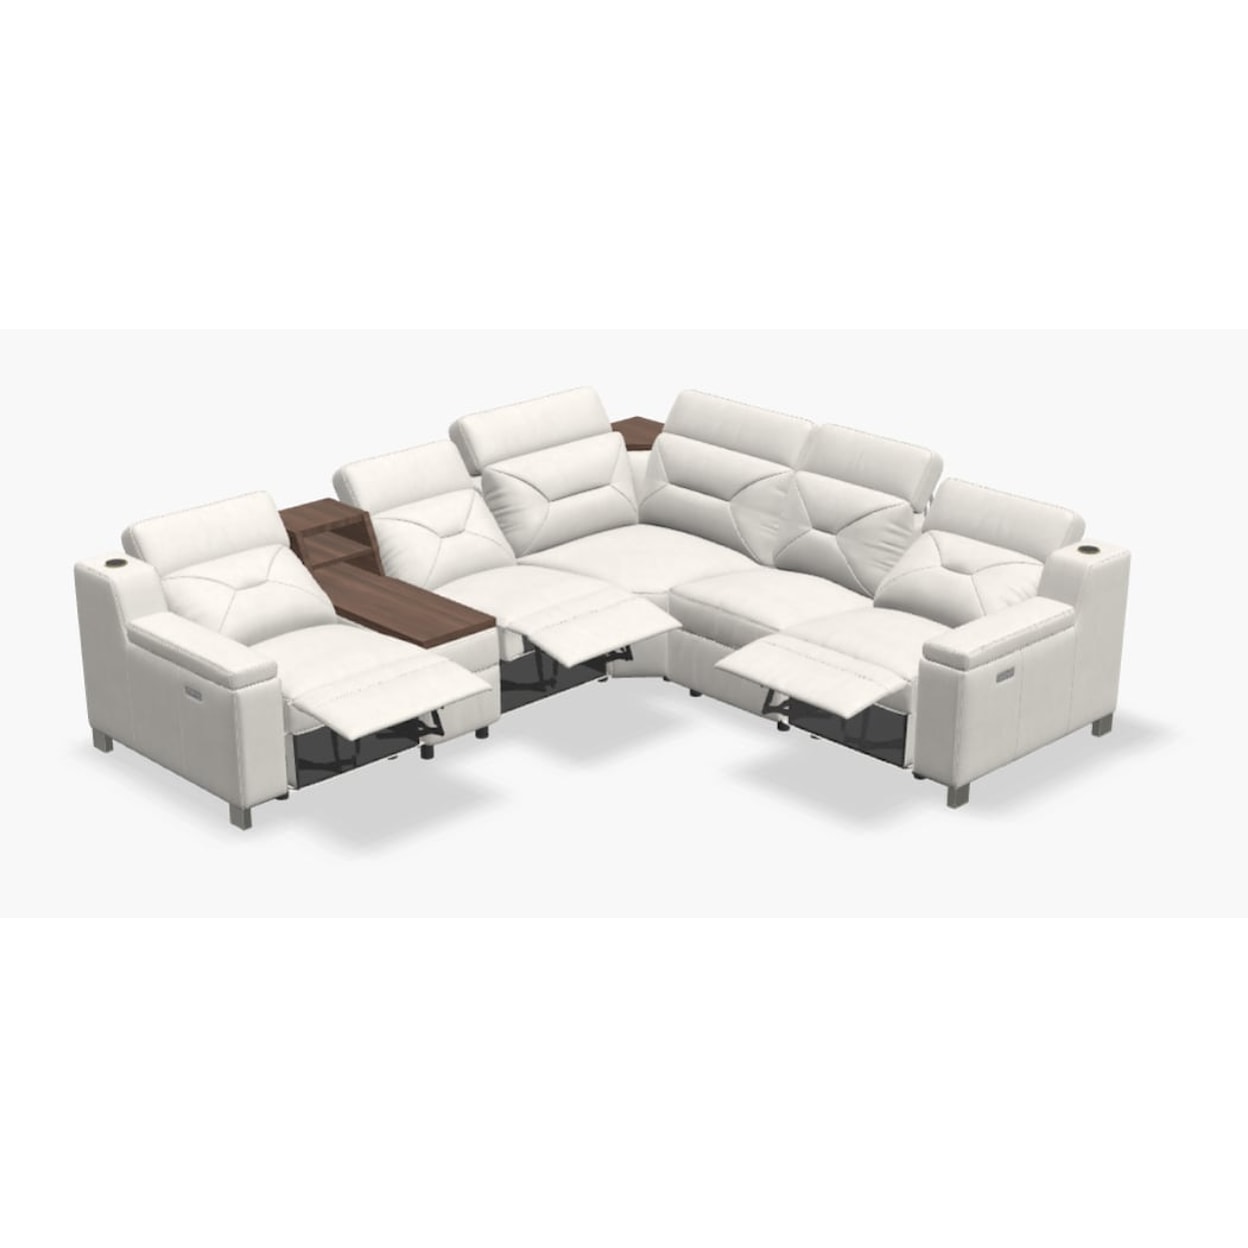 Palliser Apex 5-Seat Chaise Sectional with Storage